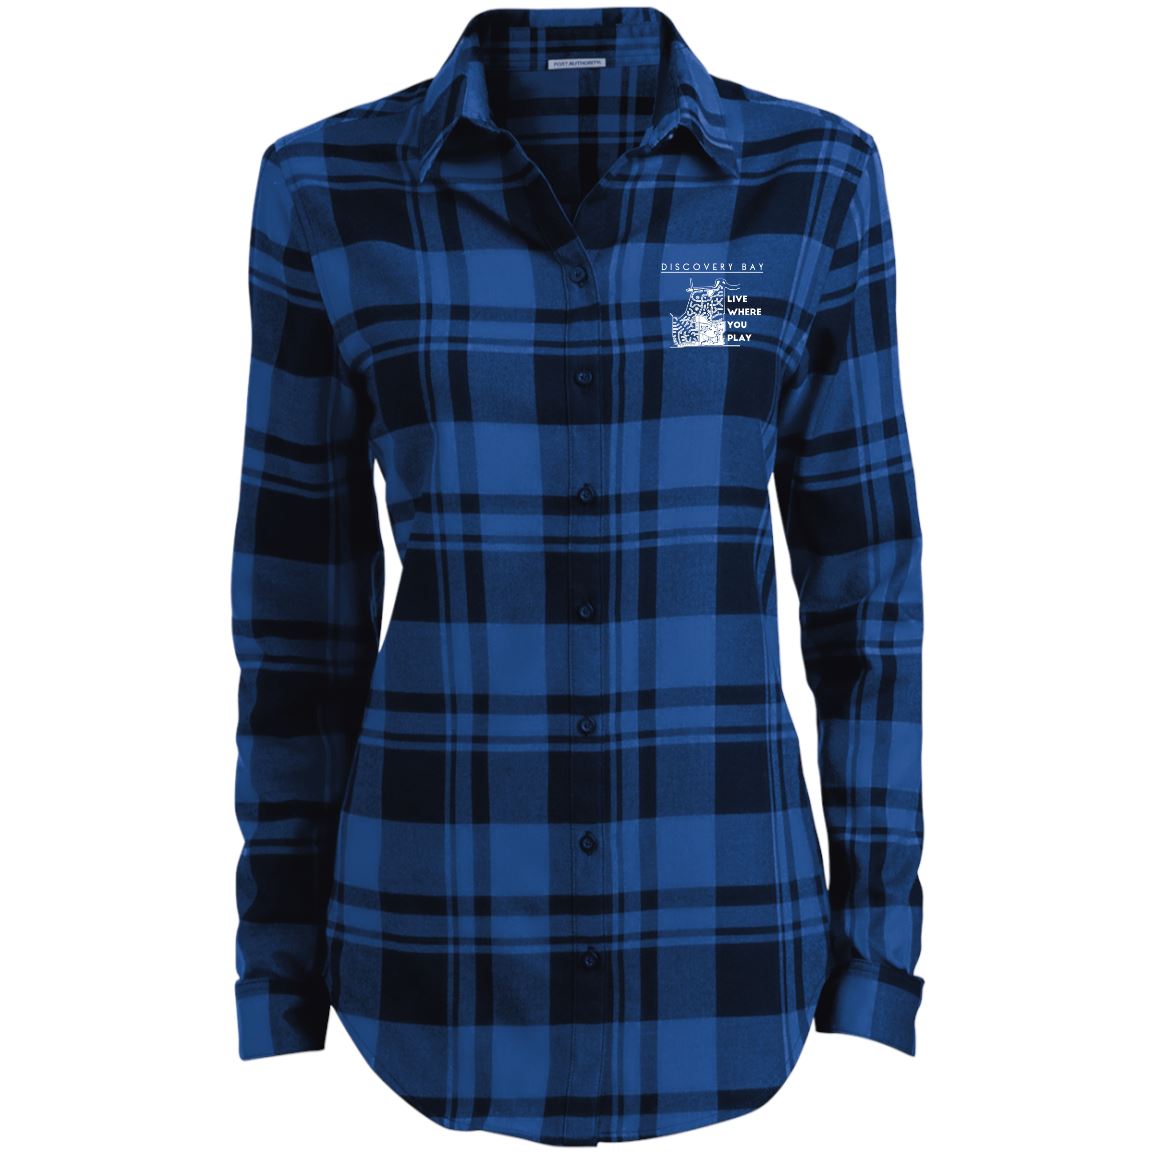 Discovery Bay Embroidered Ladies' Plaid Flannel Tunic - Houseboat Kings